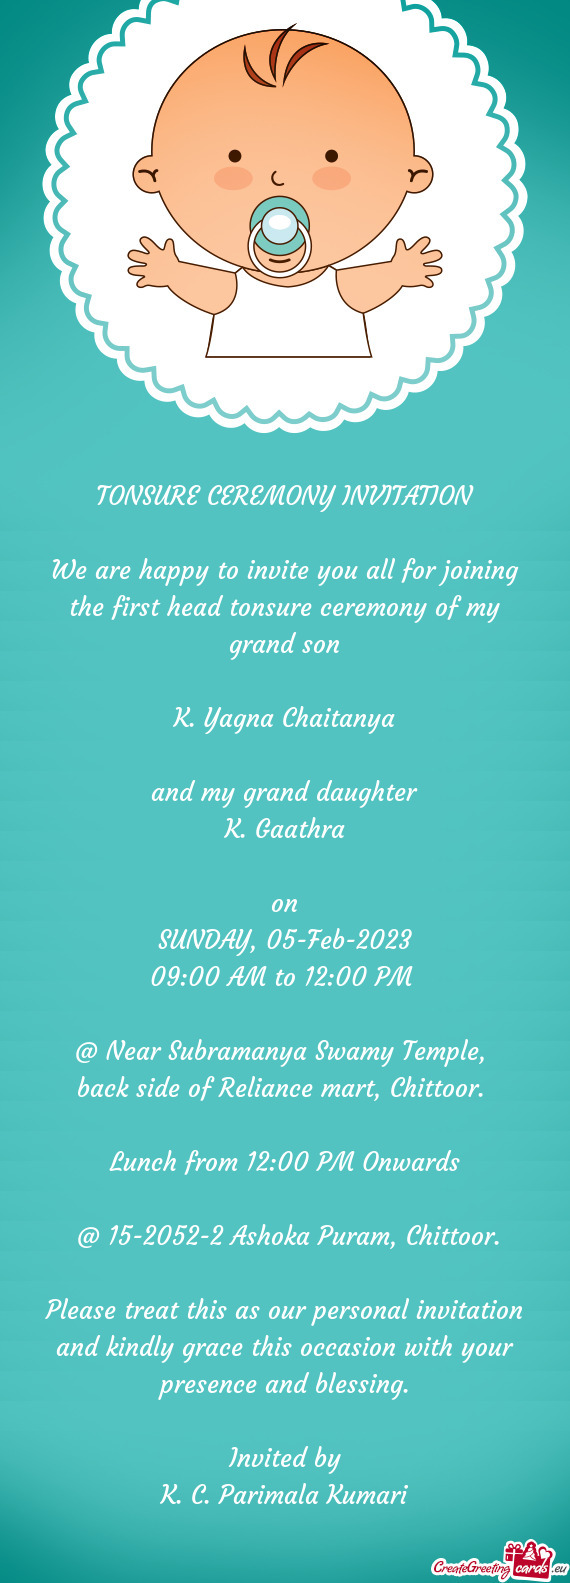 We are happy to invite you all for joining the first head tonsure ceremony of my grand son